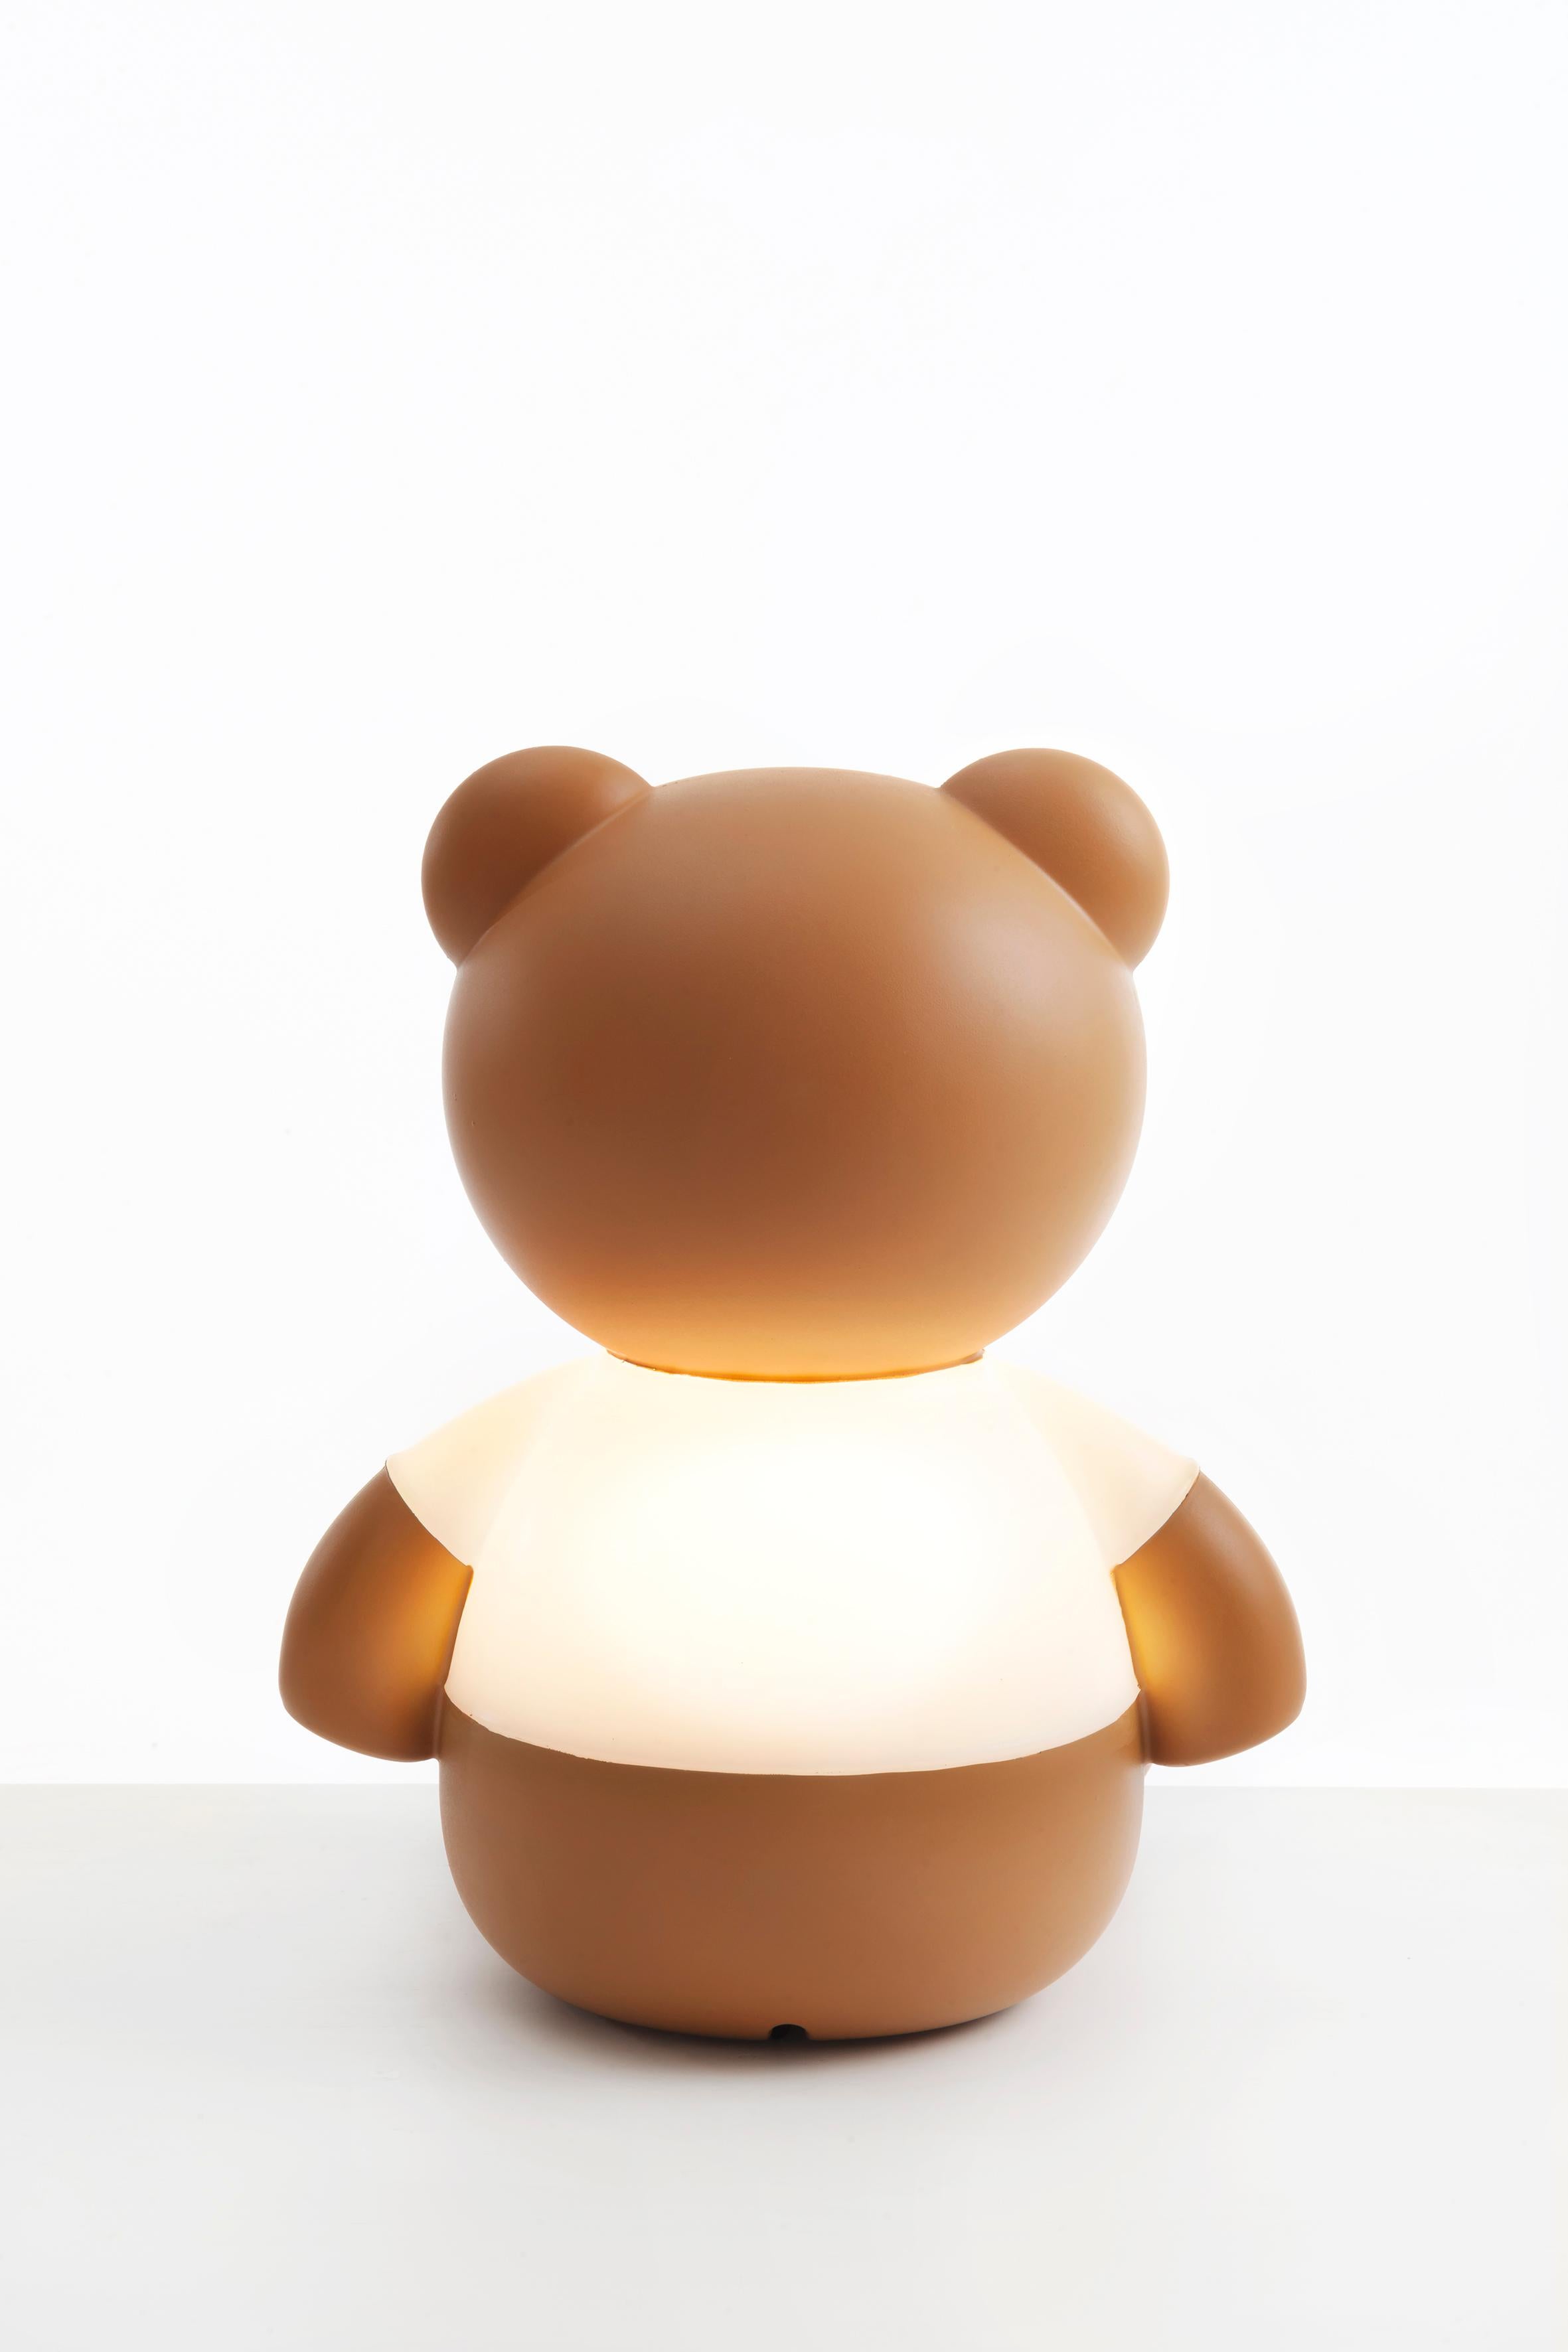 The iconic bear of Moschino, re-launched by the designer, becomes a table lamp for Kartell that interprets the playful, irreverent and colourful style that the two brands have in common.